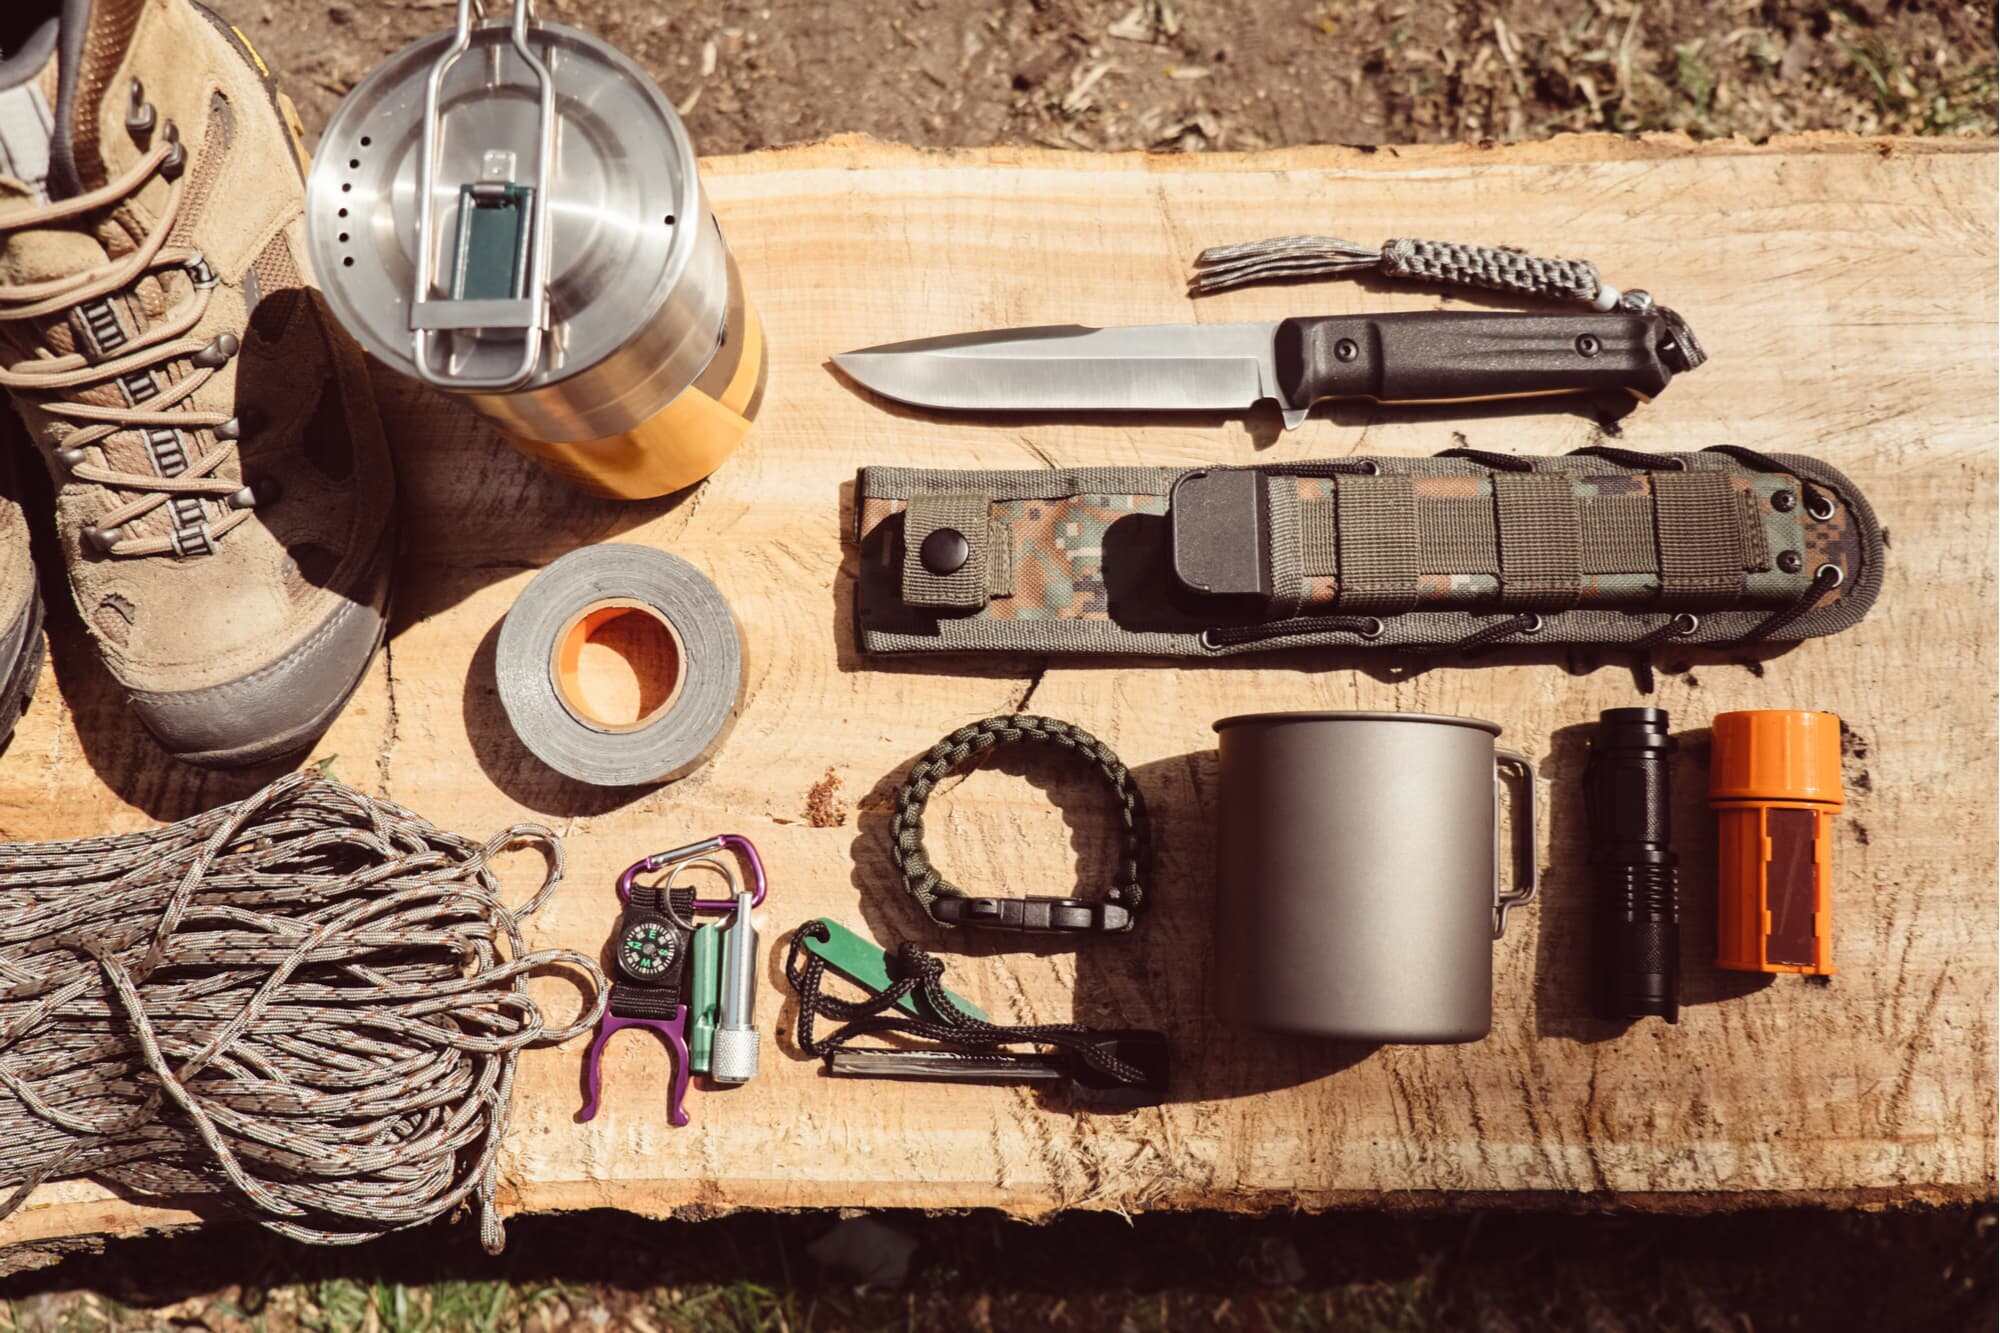 Outdoor Survival Kit Review: Essential Gear for Wilderness Adventures